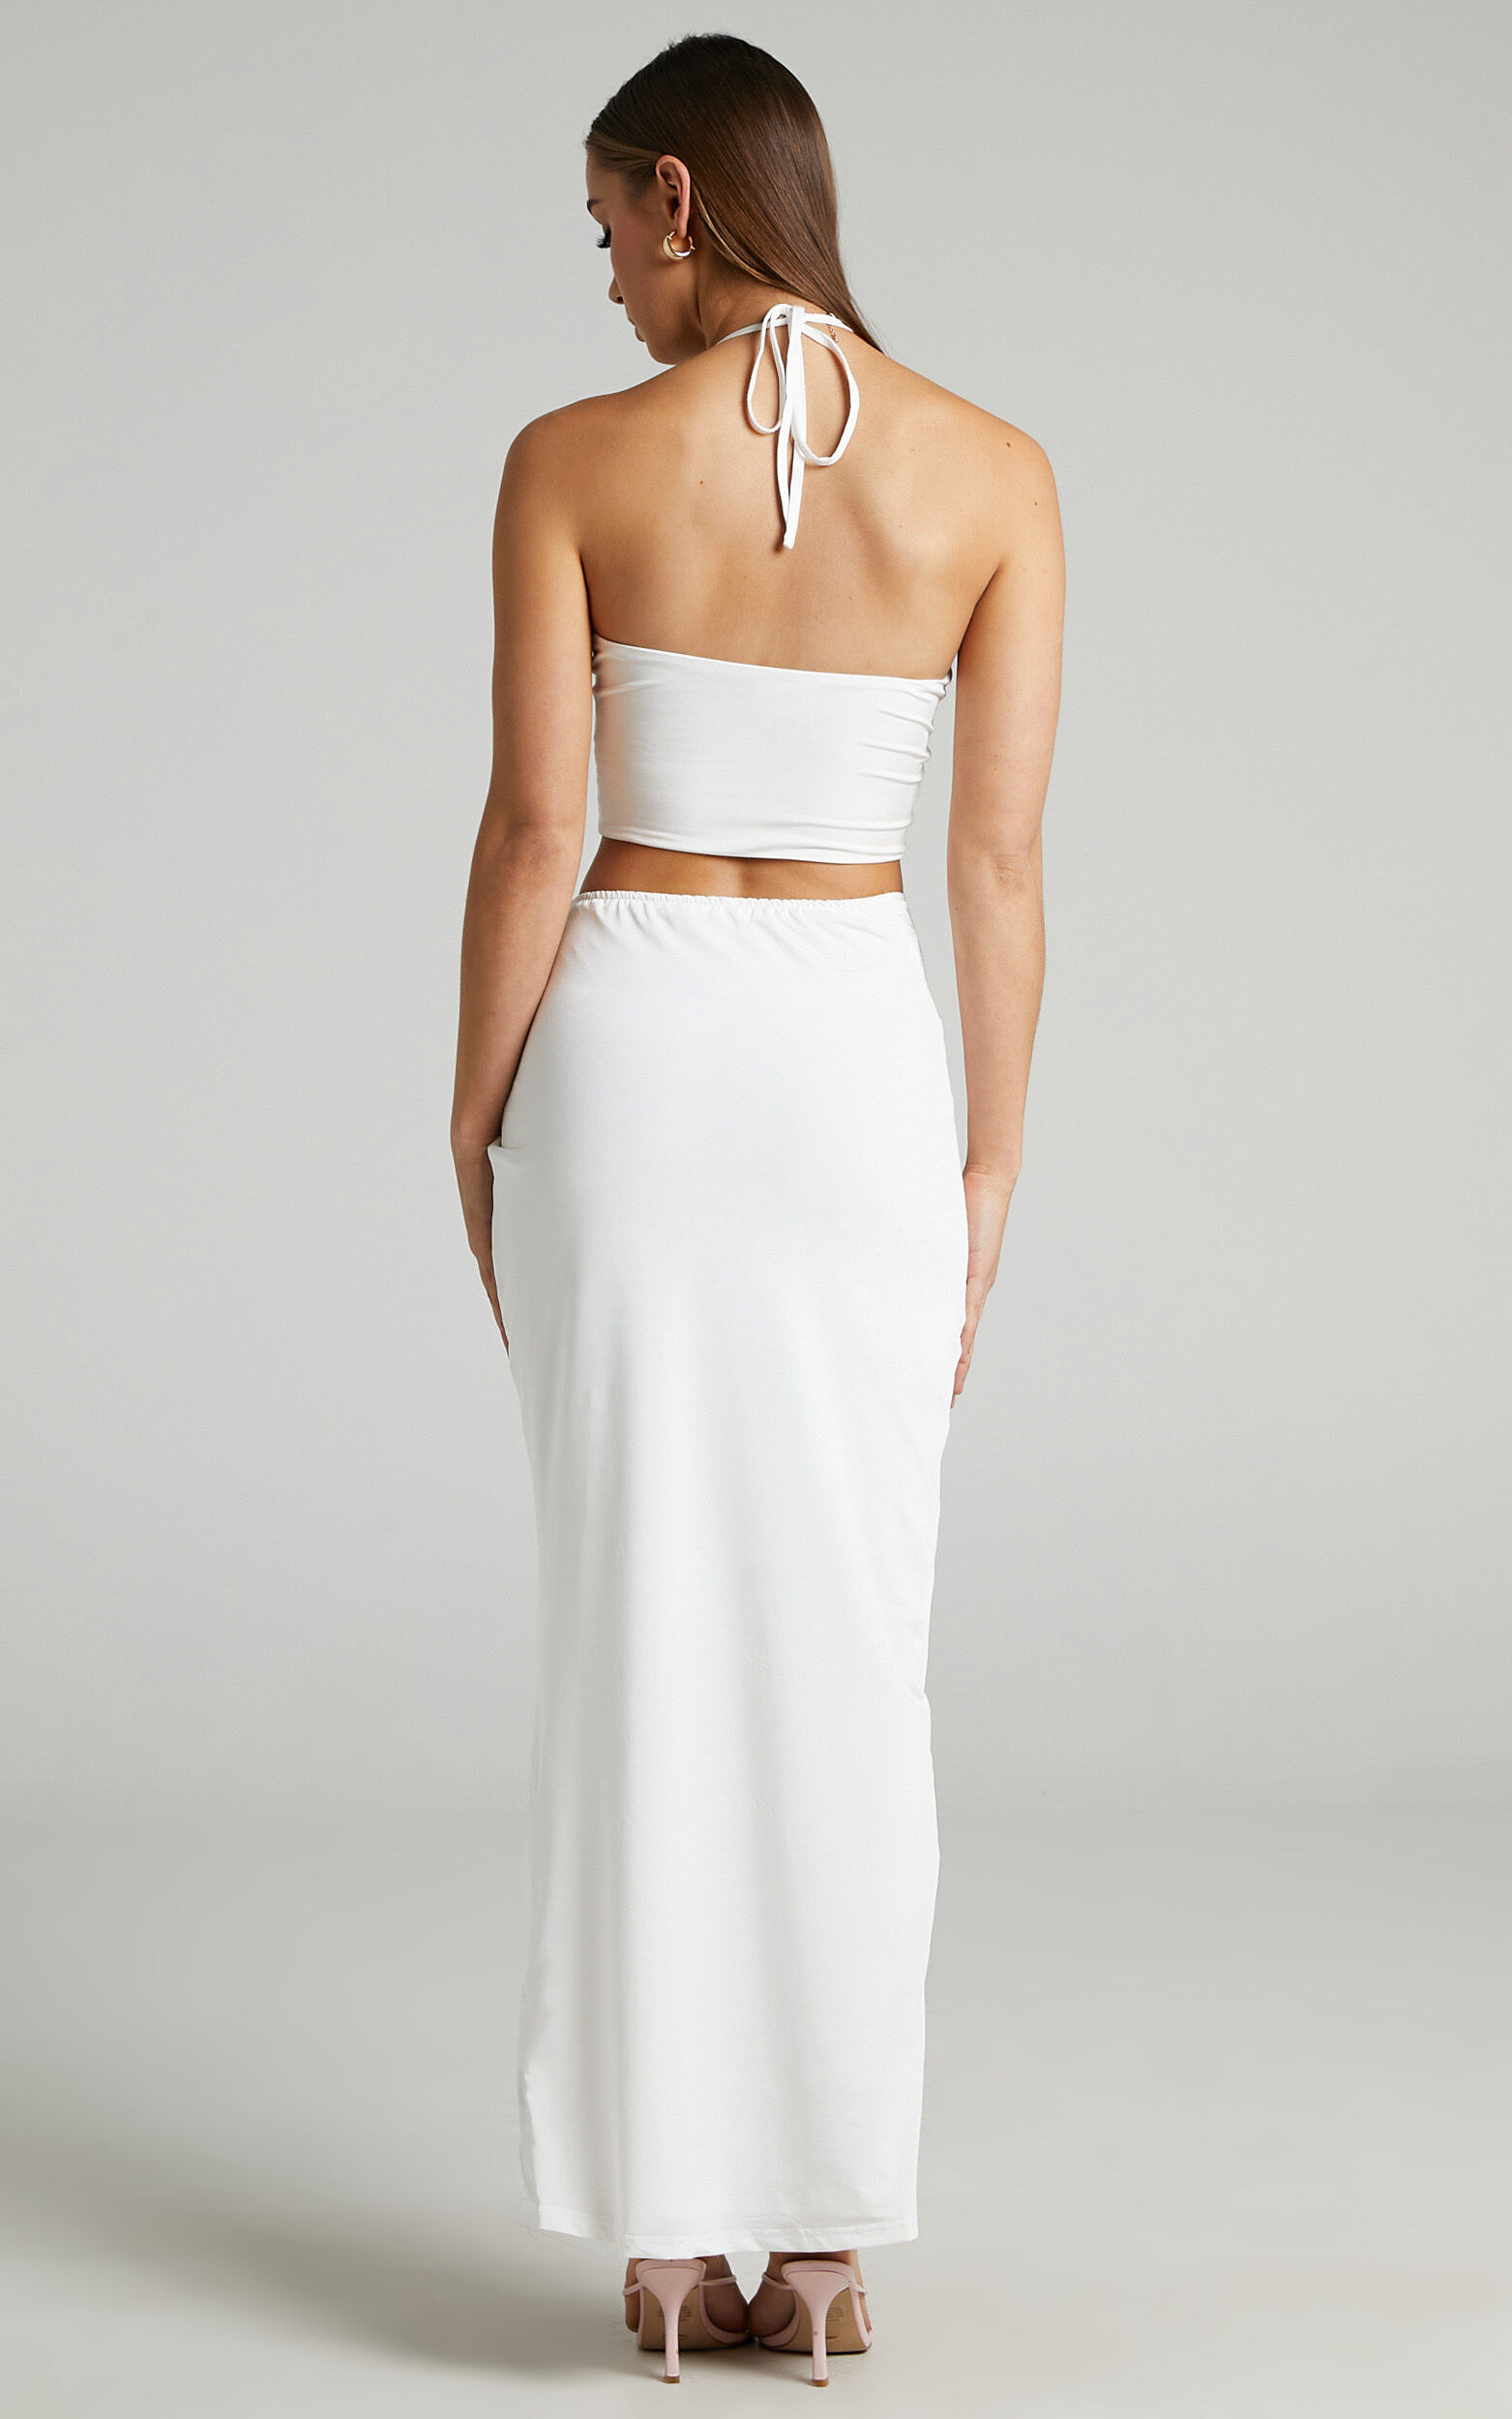 Forrest Two Piece Set - Halter Neck Top and Twist Midi Skirt Set in White